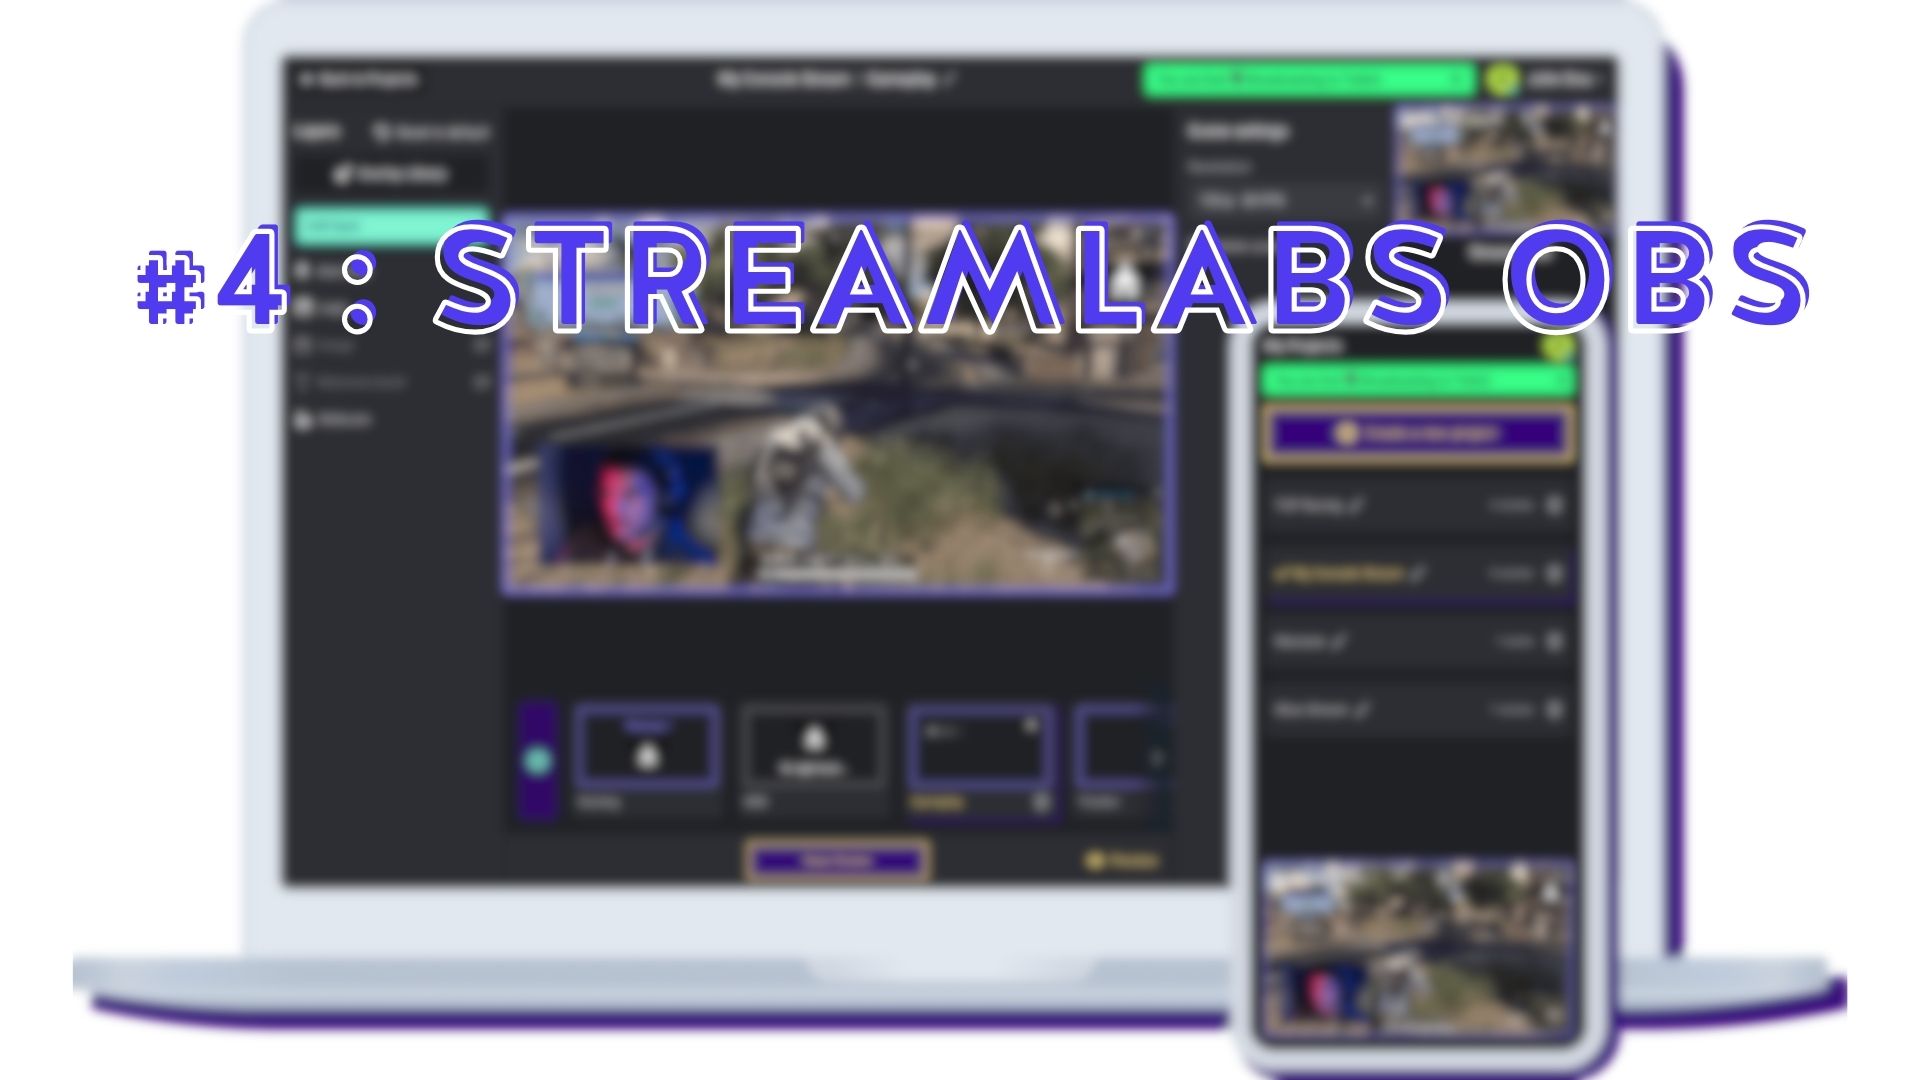 Stream labs OBS